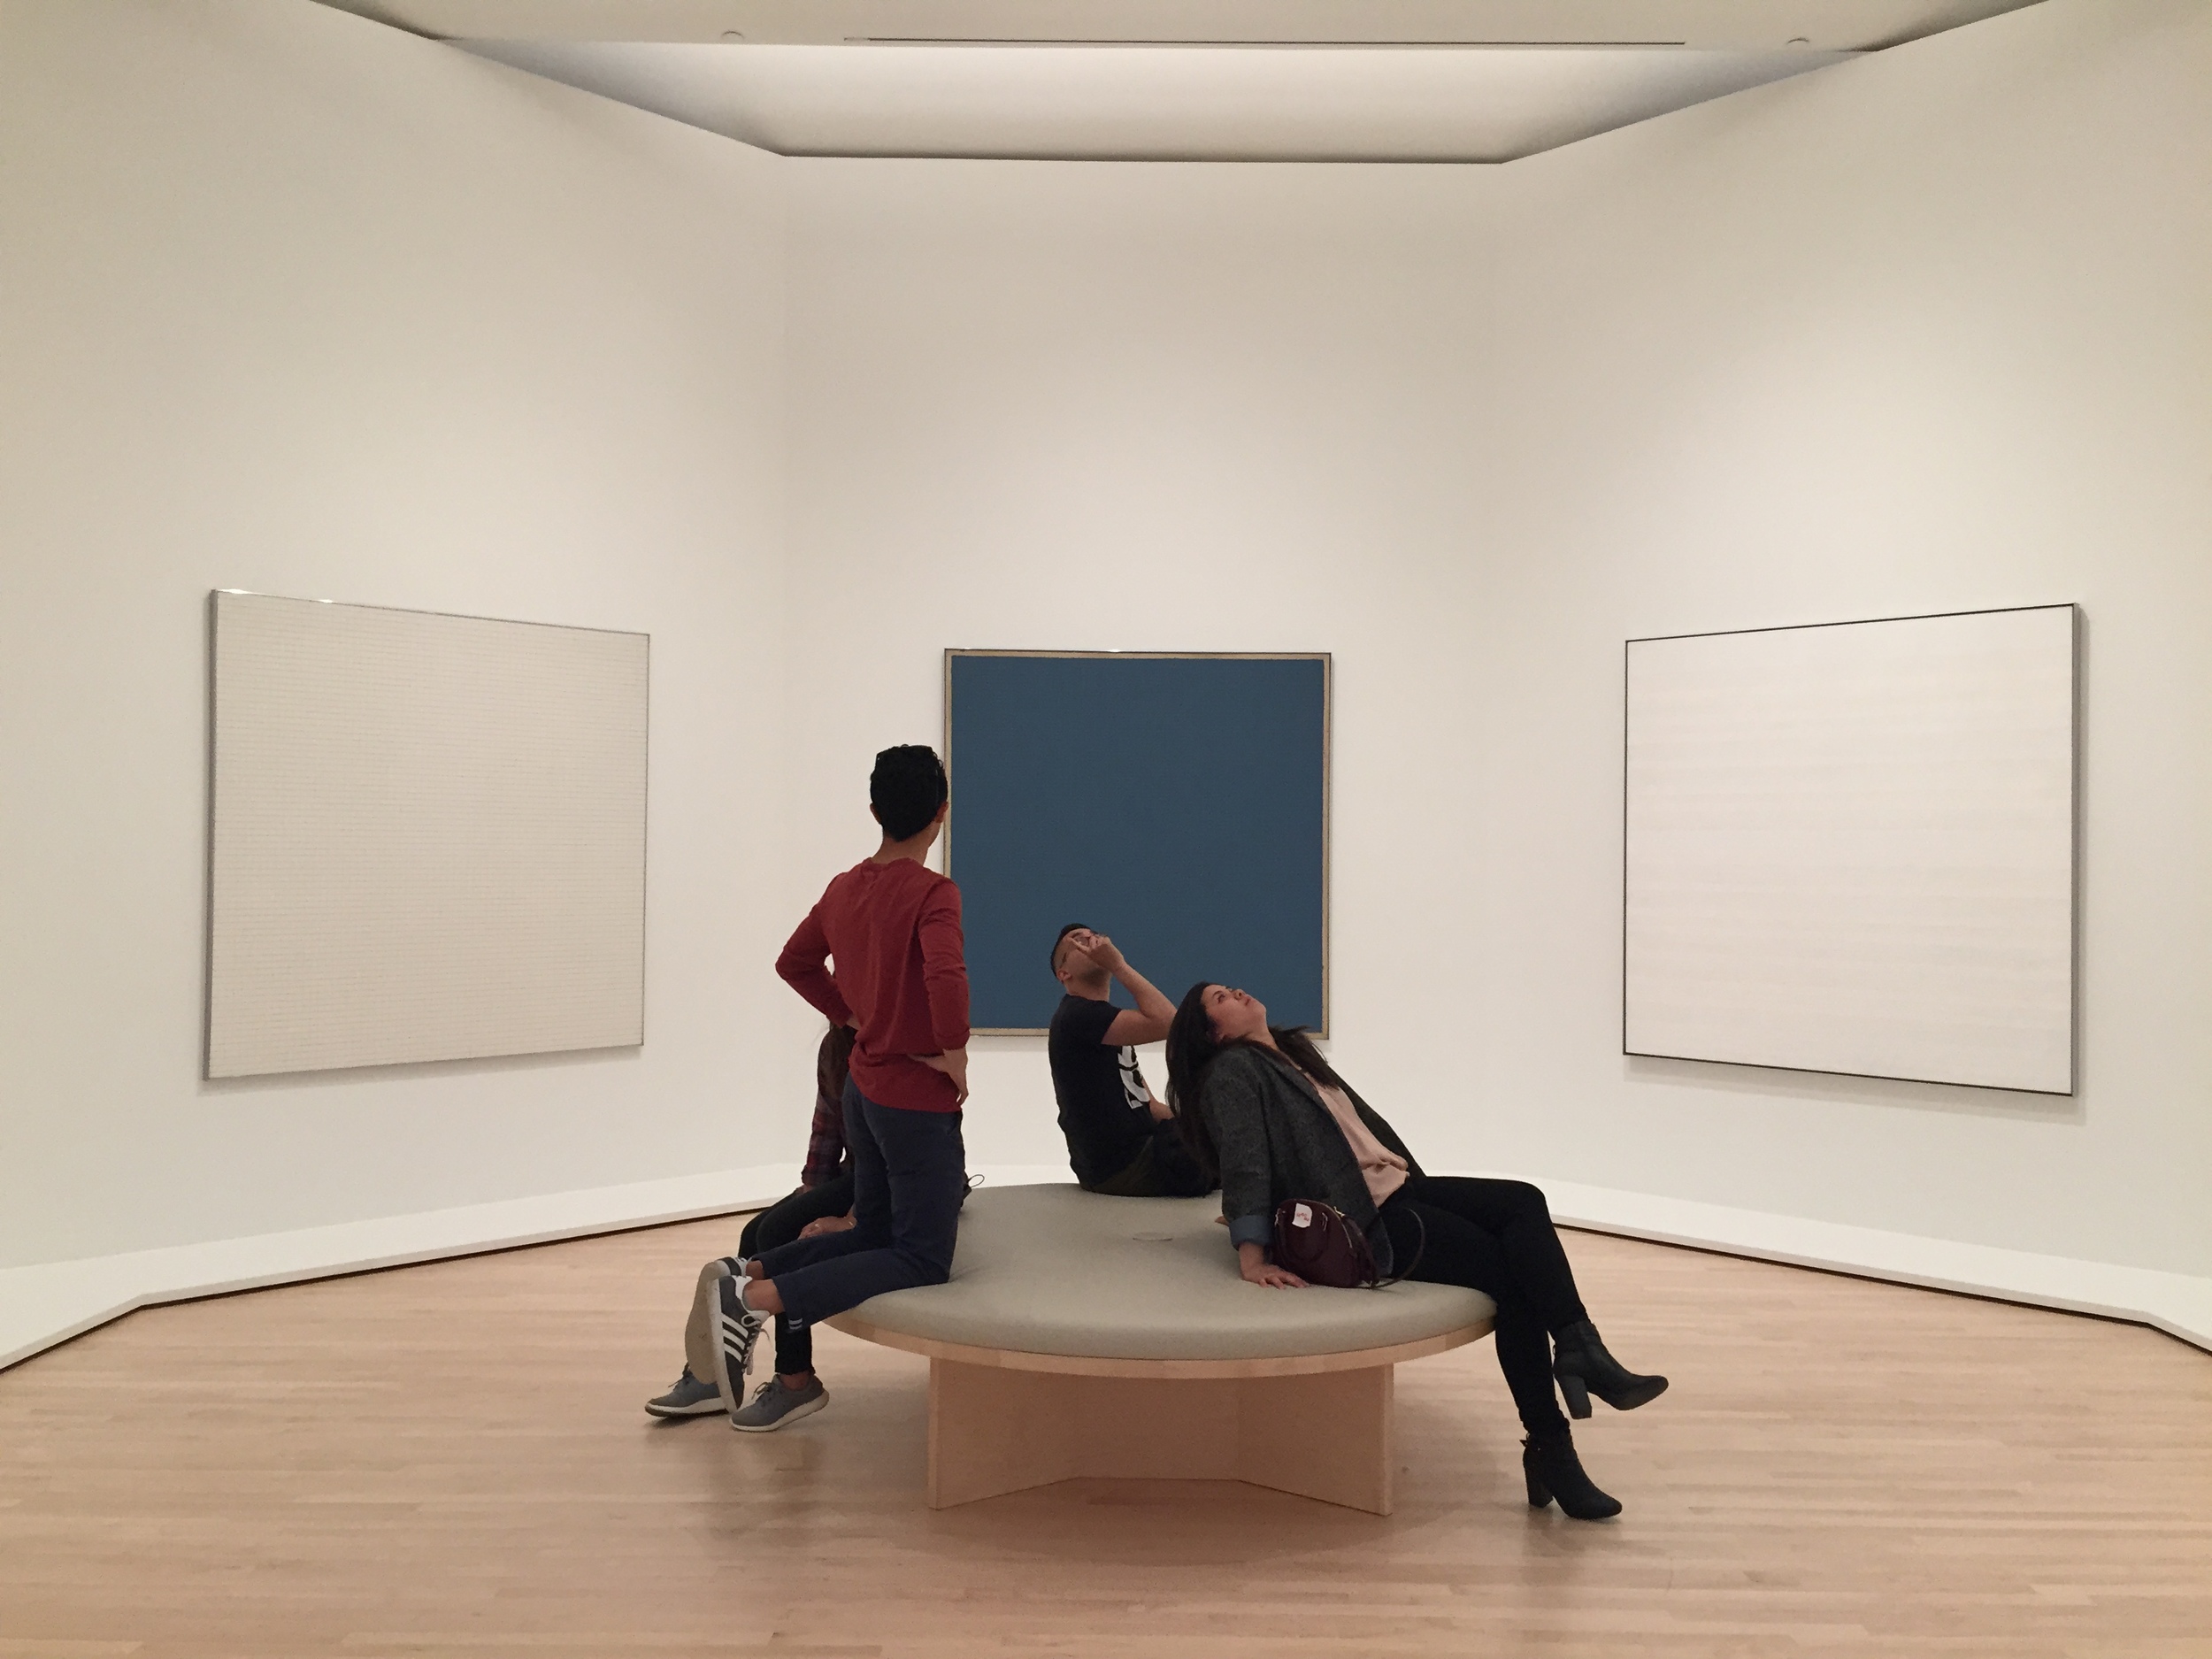 Top MOMA SF by Brittney Fong.JPG